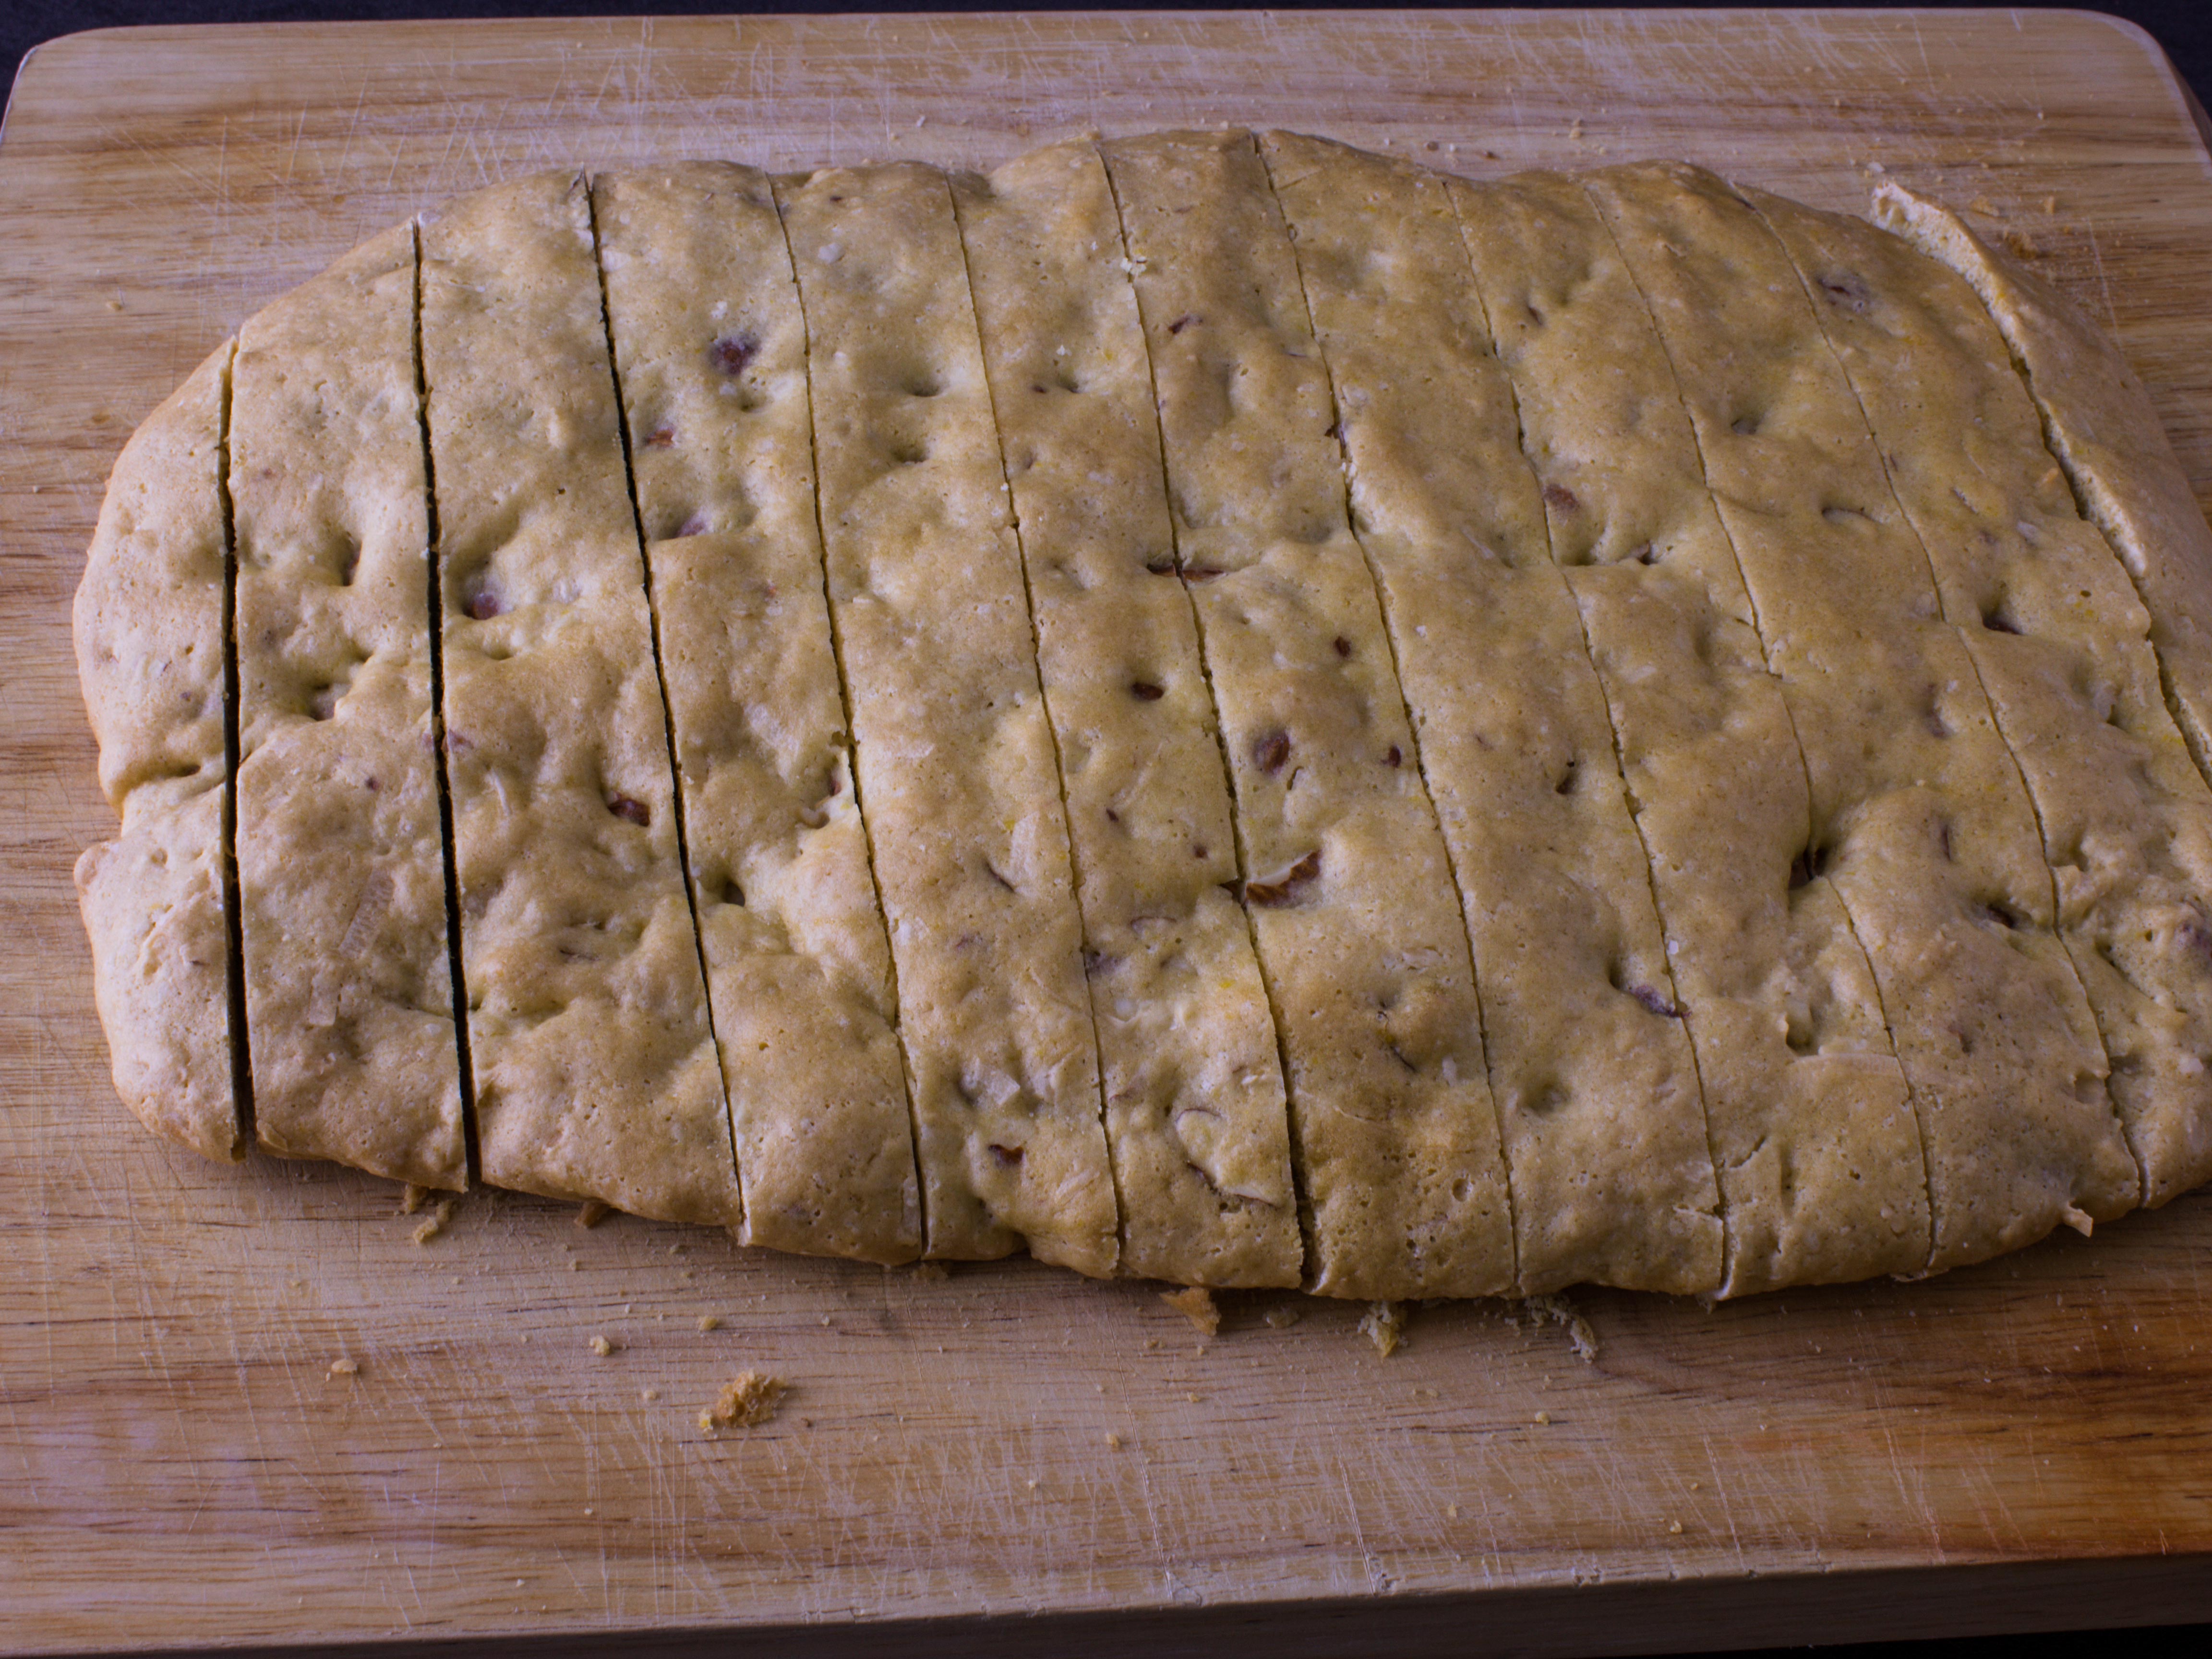 coconut biscotti dough that has cooled down and is in 1 inch slices